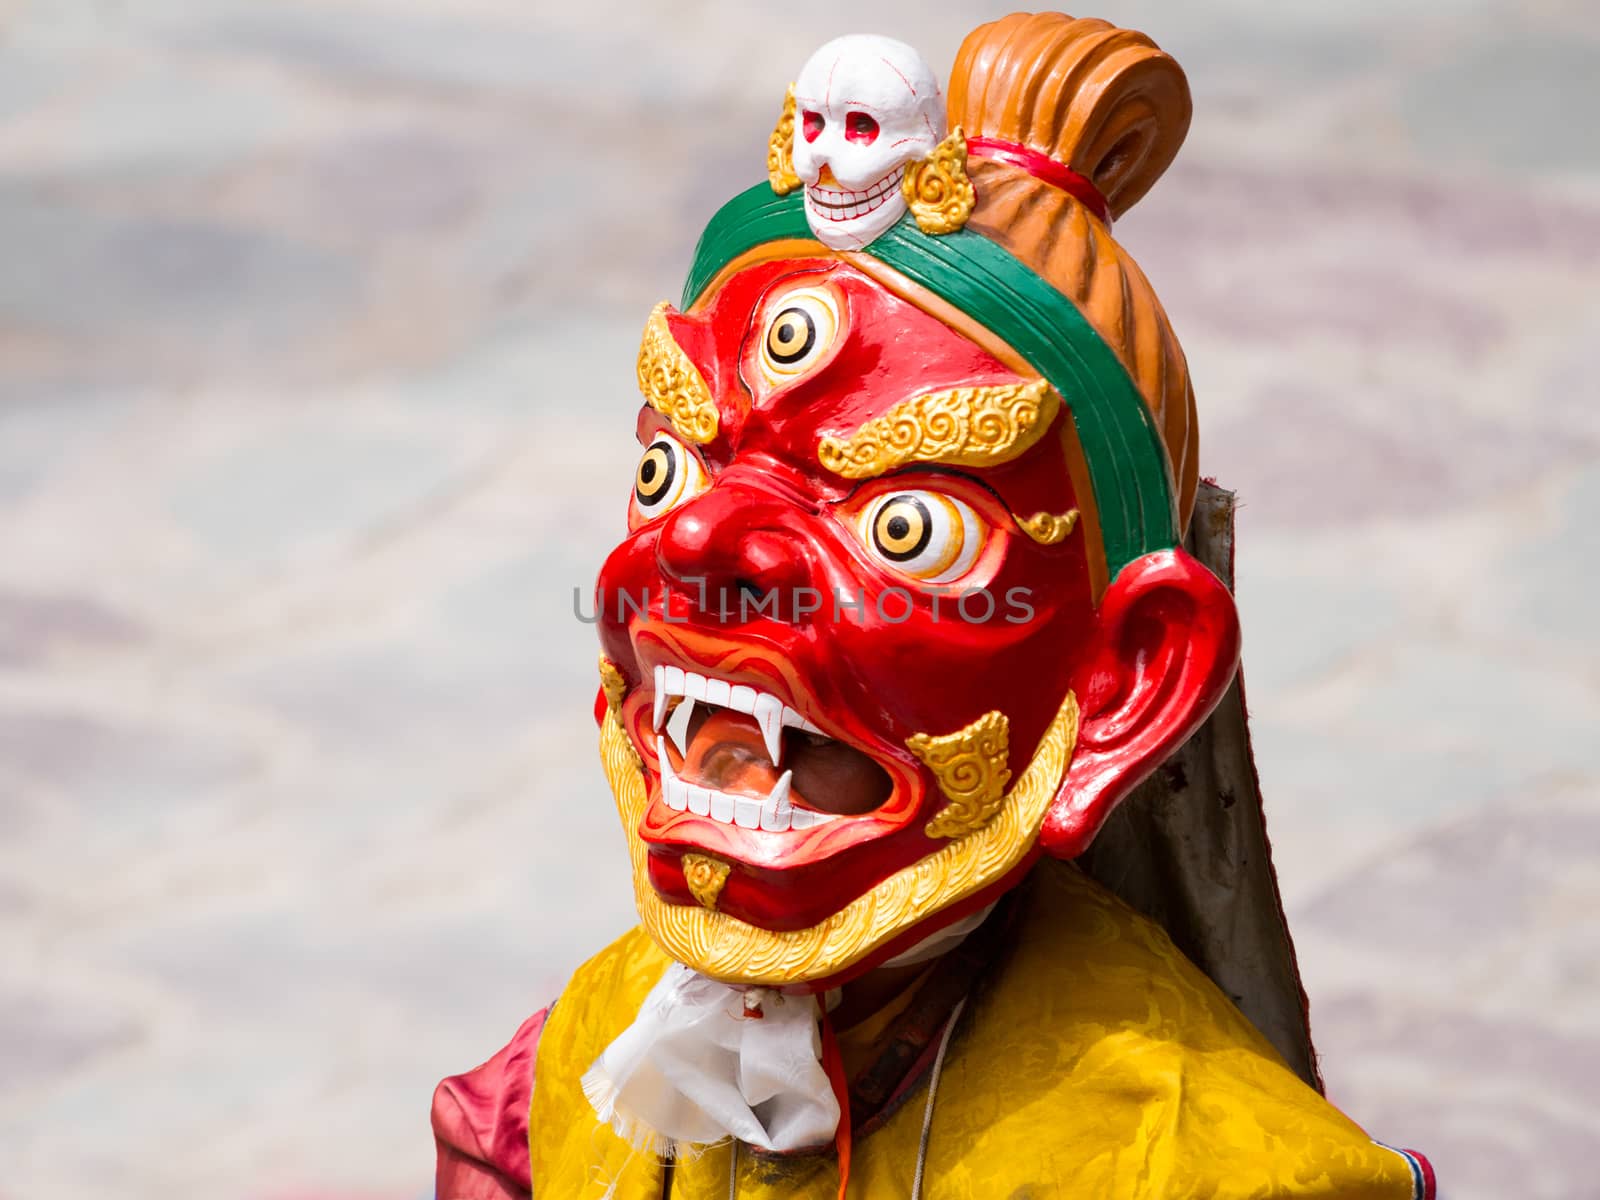 Unidentified monk performs a religious masked and costumed mystery dance of Tibetan Buddhism during the Cham Dance Festival in Hemis monastery, India.